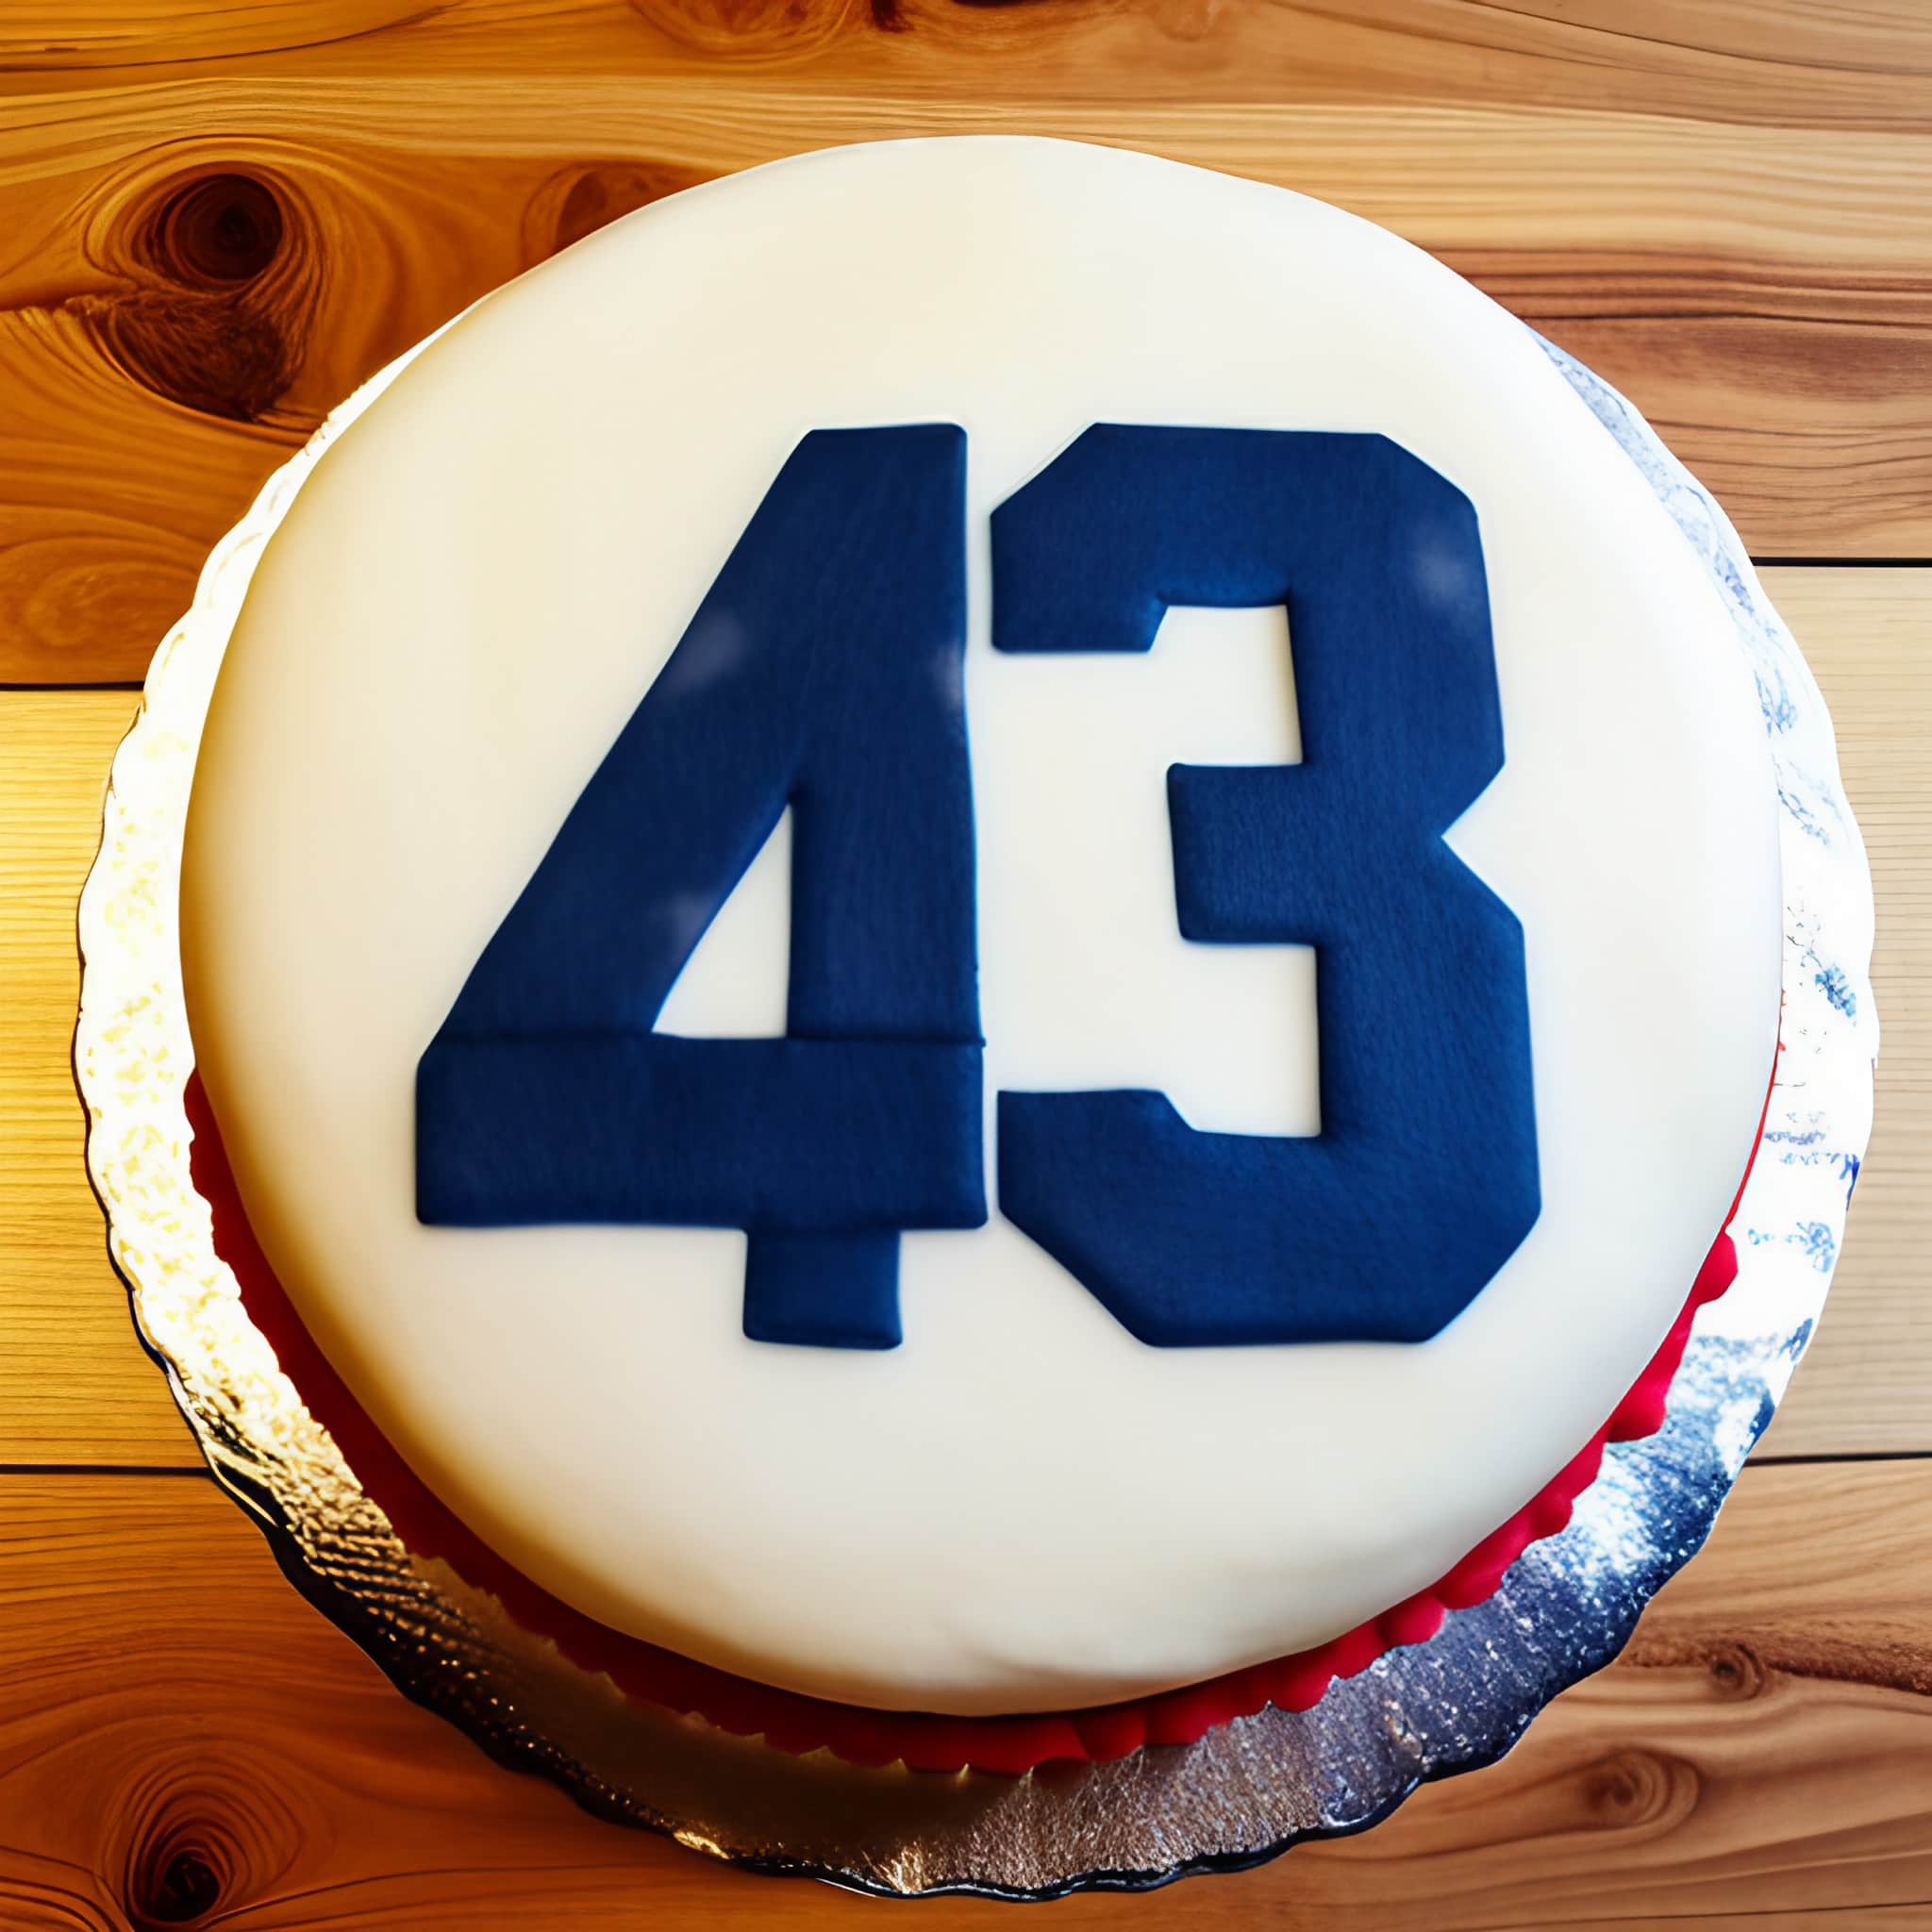 Cake with 43 on it